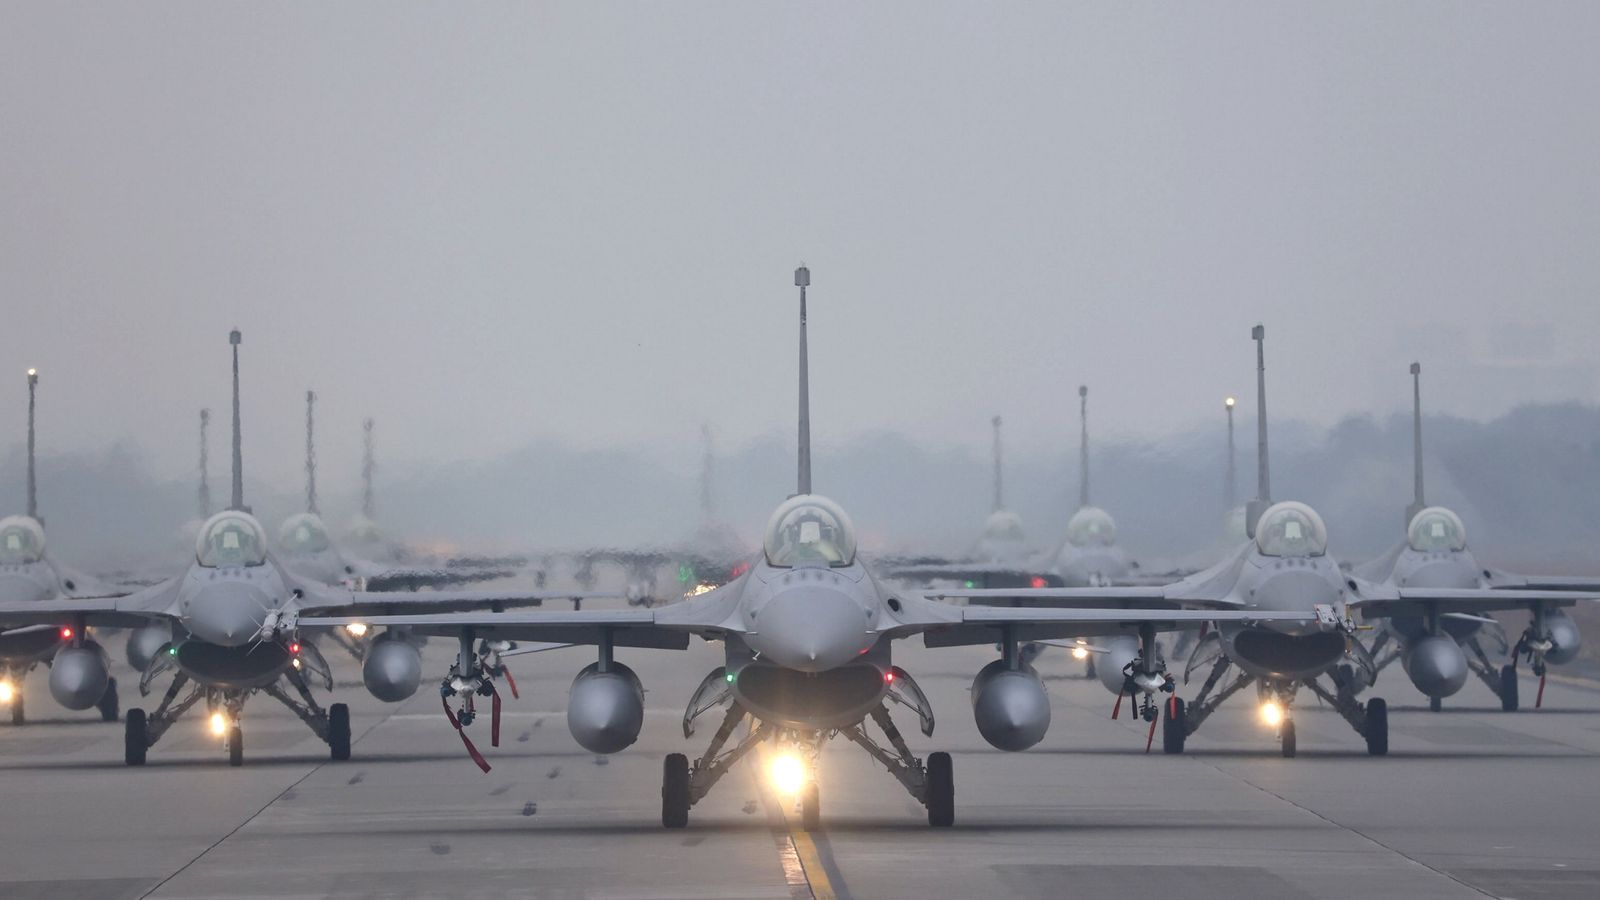 Jets scrambled in response to China’s military drills – as furious Beijing issues dire warnings to US after Pelosi visit | Taiwan latest